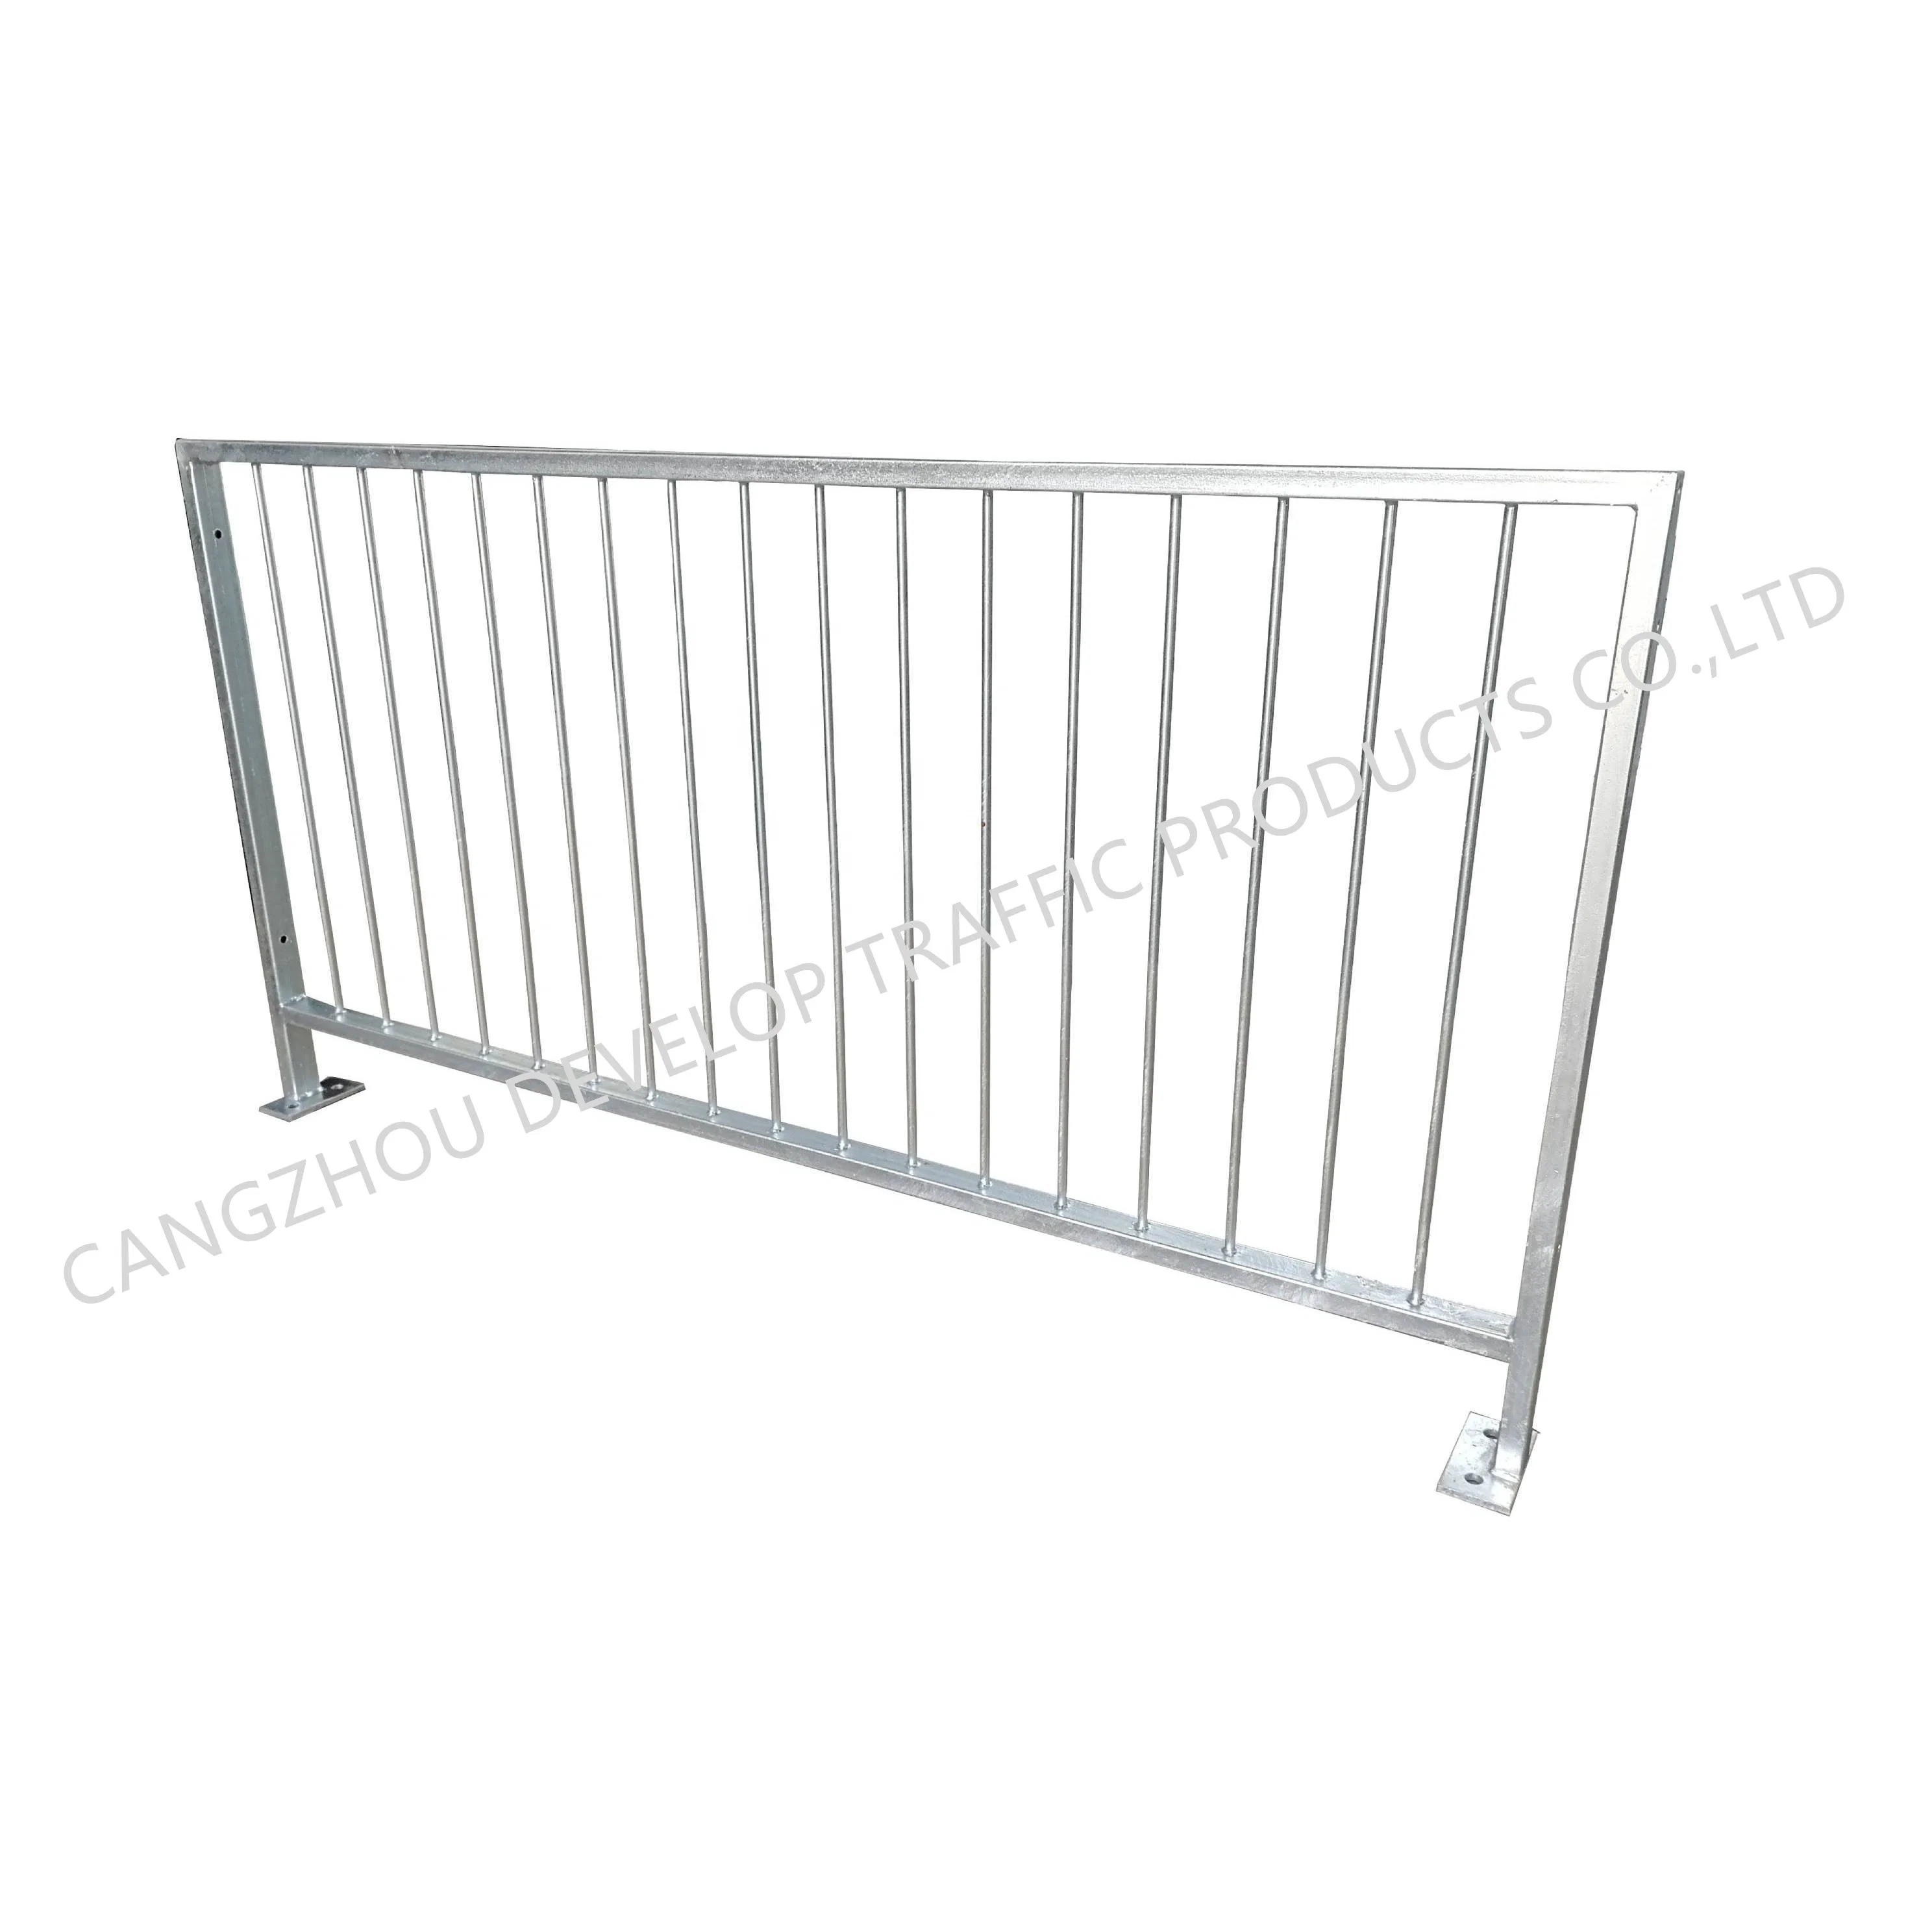 High Quality Road Safety Highway Safety Fence Product